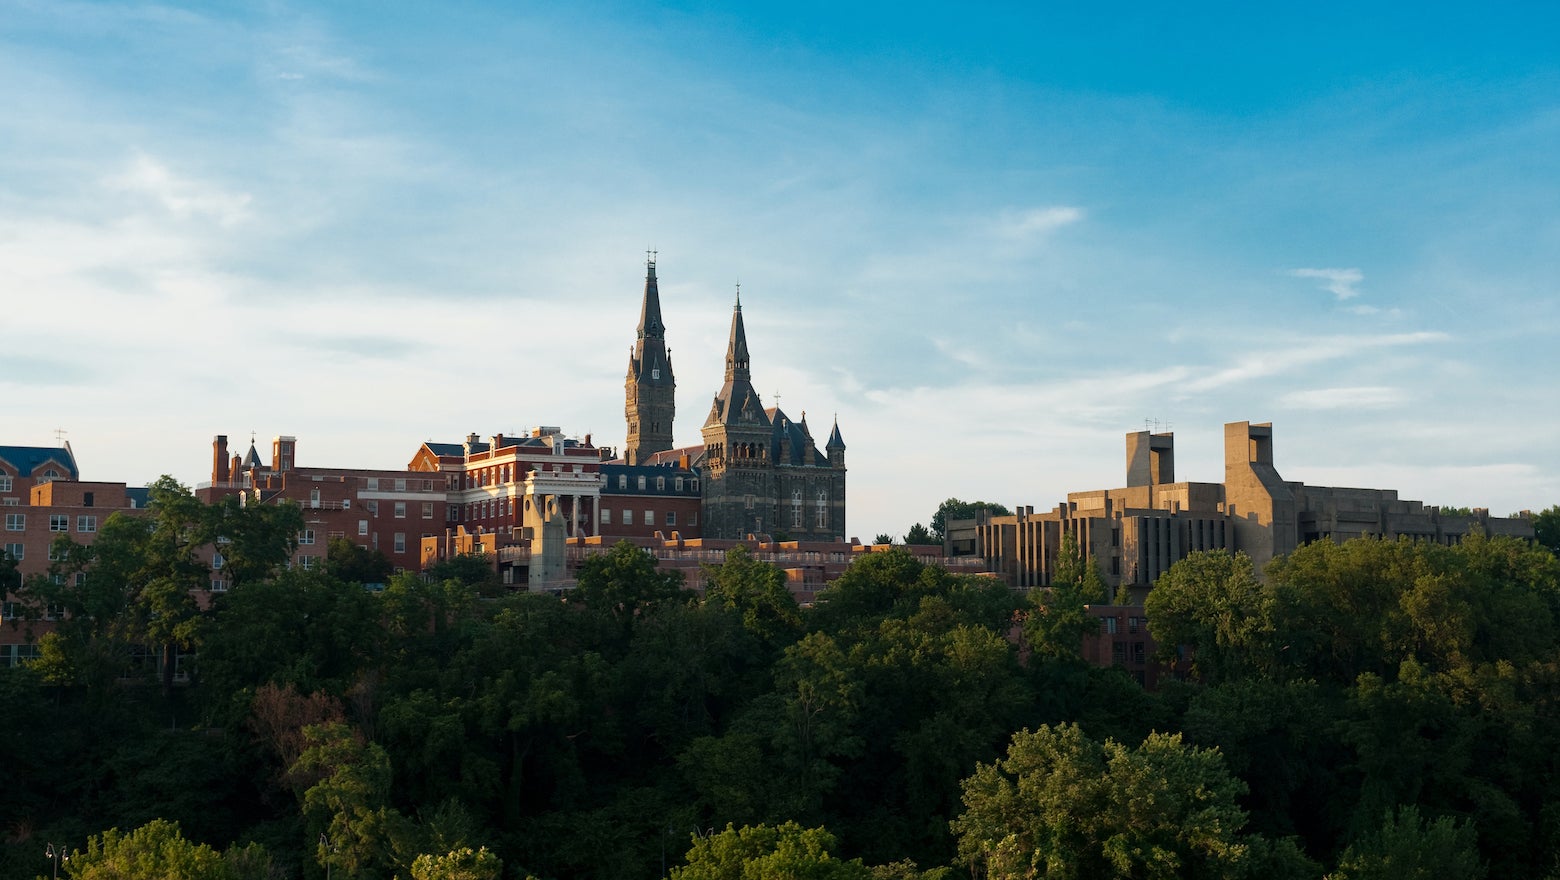 Georgetown University skyline from the Potomac River